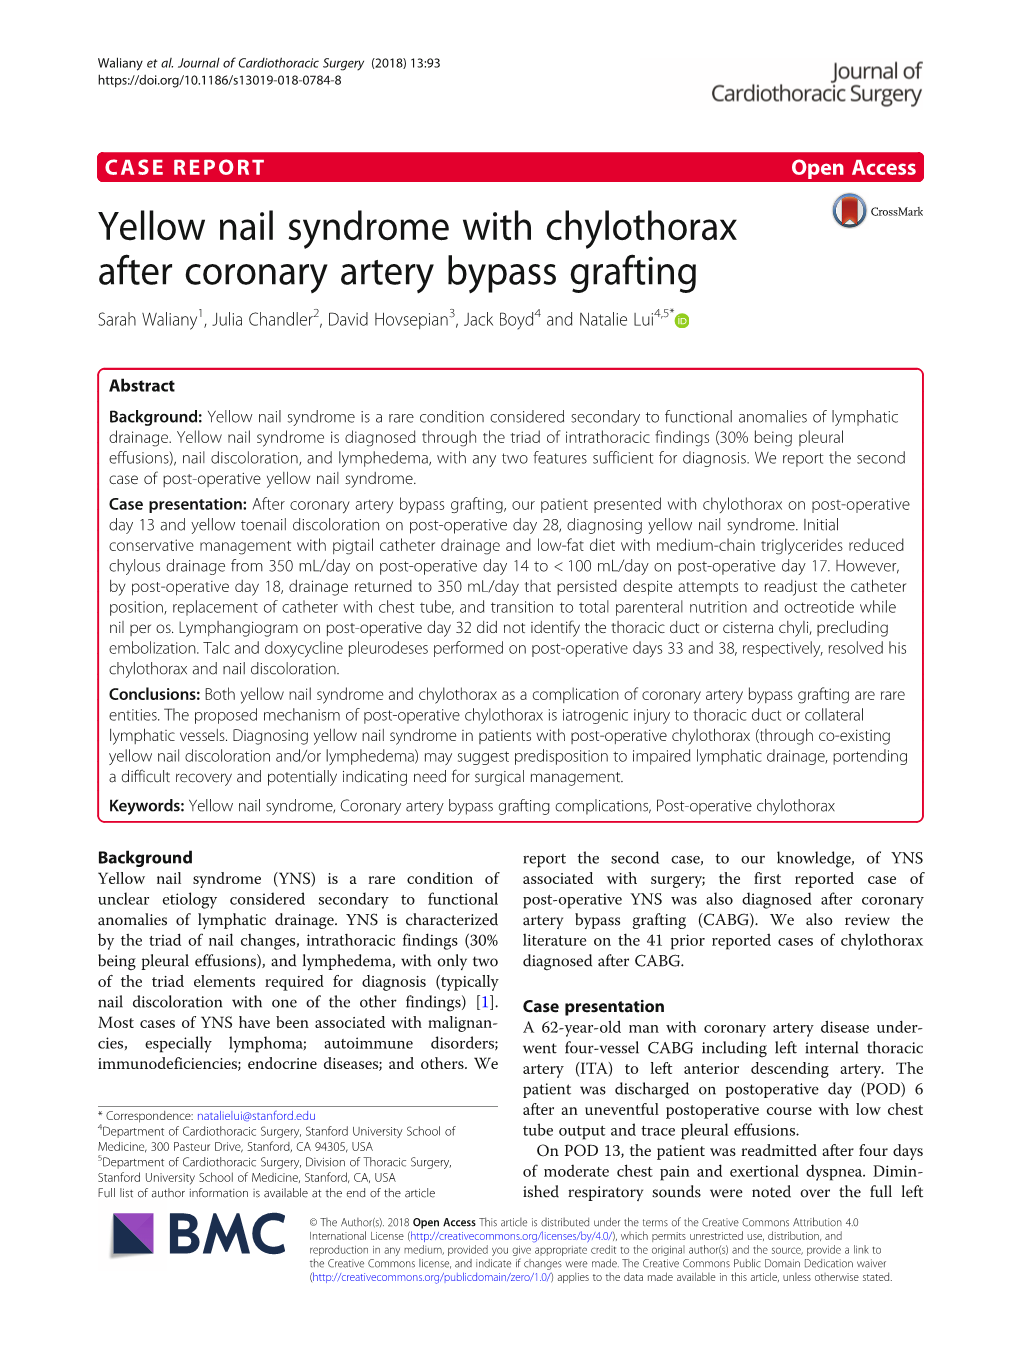 Yellow Nail Syndrome with Chylothorax After Coronary Artery Bypass Grafting Sarah Waliany1, Julia Chandler2, David Hovsepian3, Jack Boyd4 and Natalie Lui4,5*